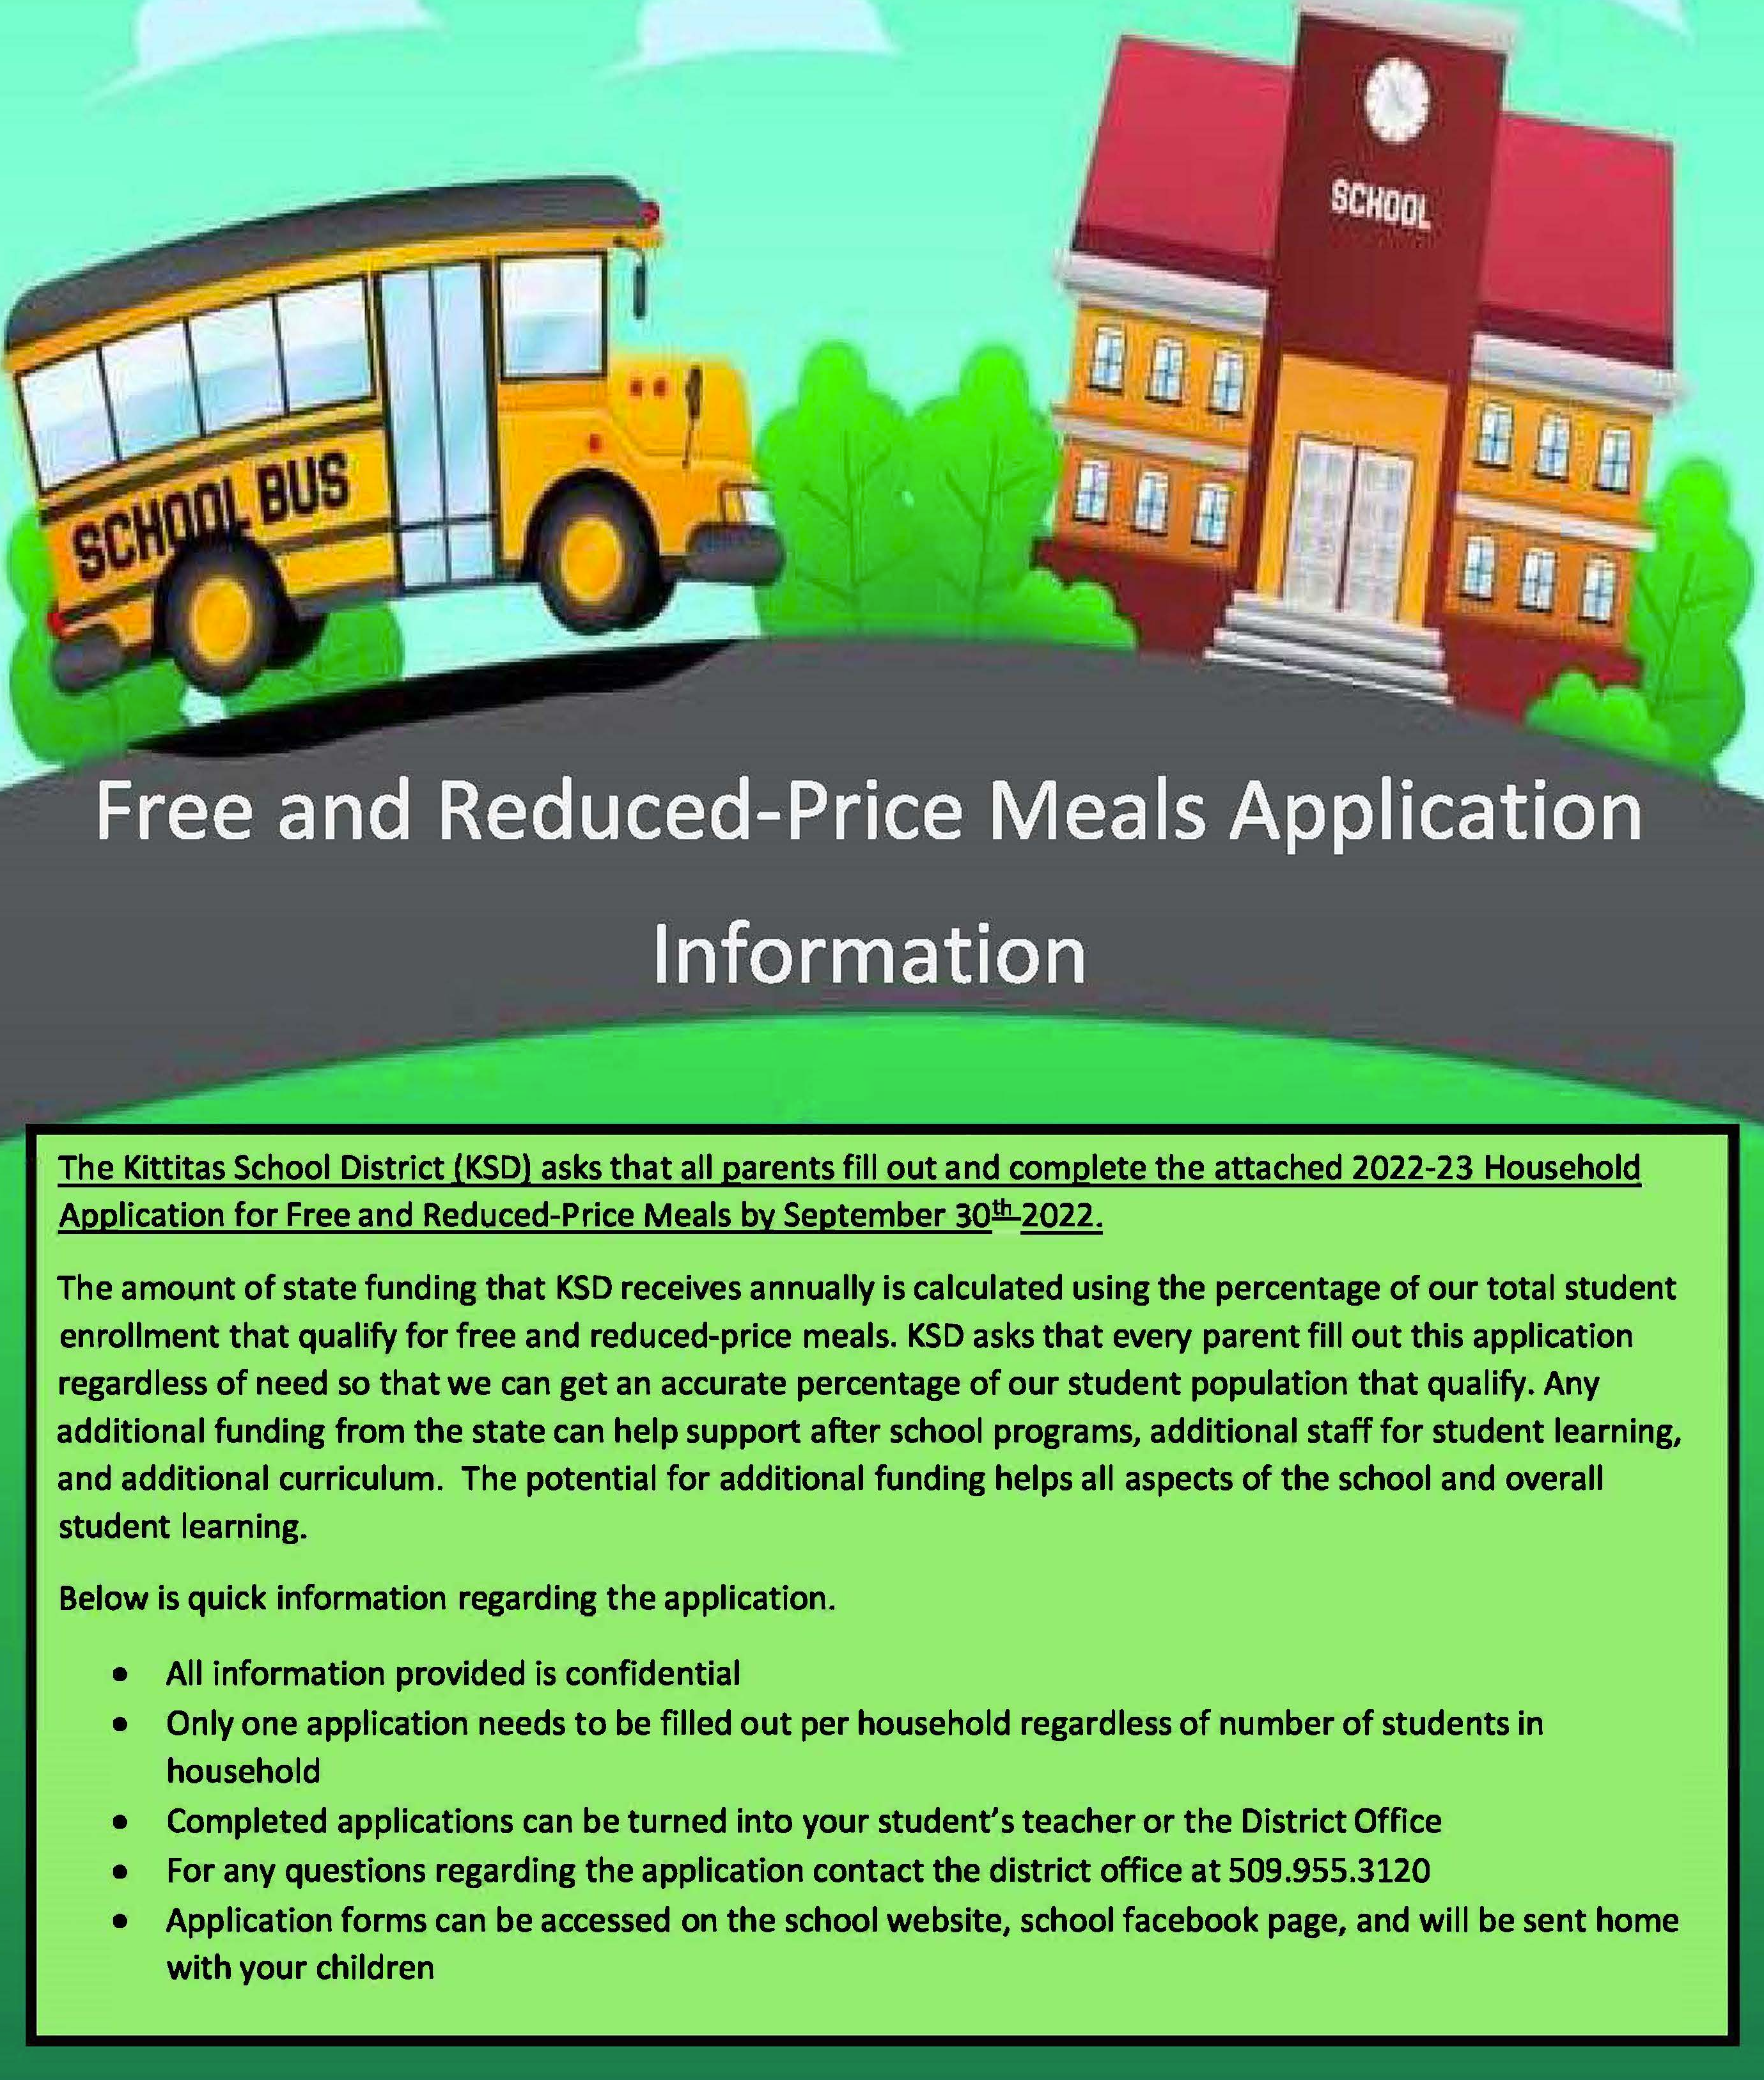 Free and Reduced Lunch Application information